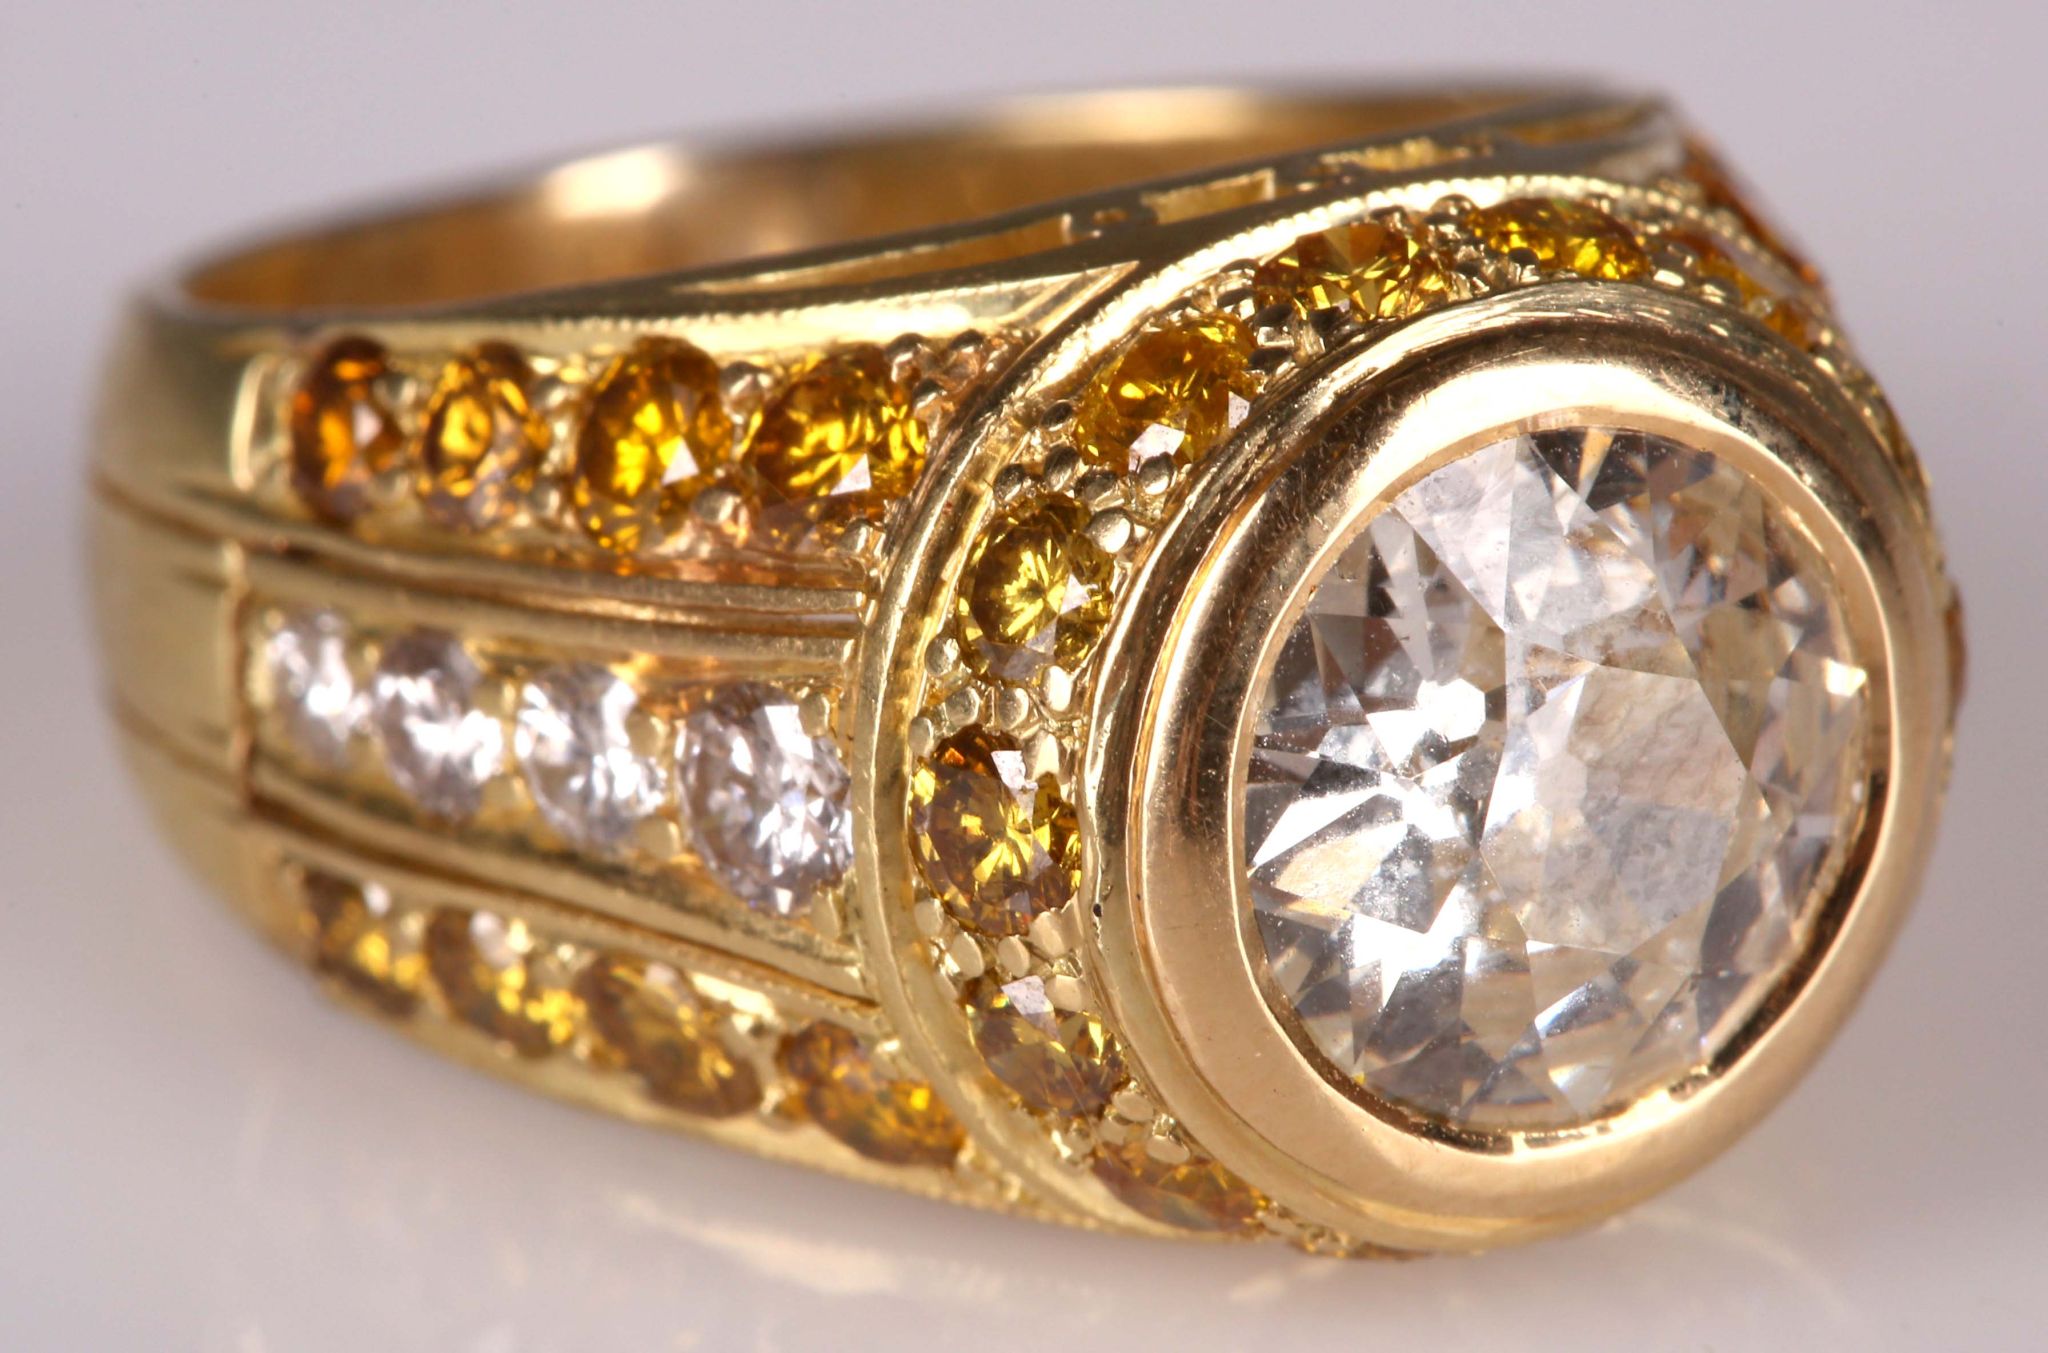 A fine 18ct gold and diamond ring, the 2.14ct centre brilliant round cut stone framed by yellow